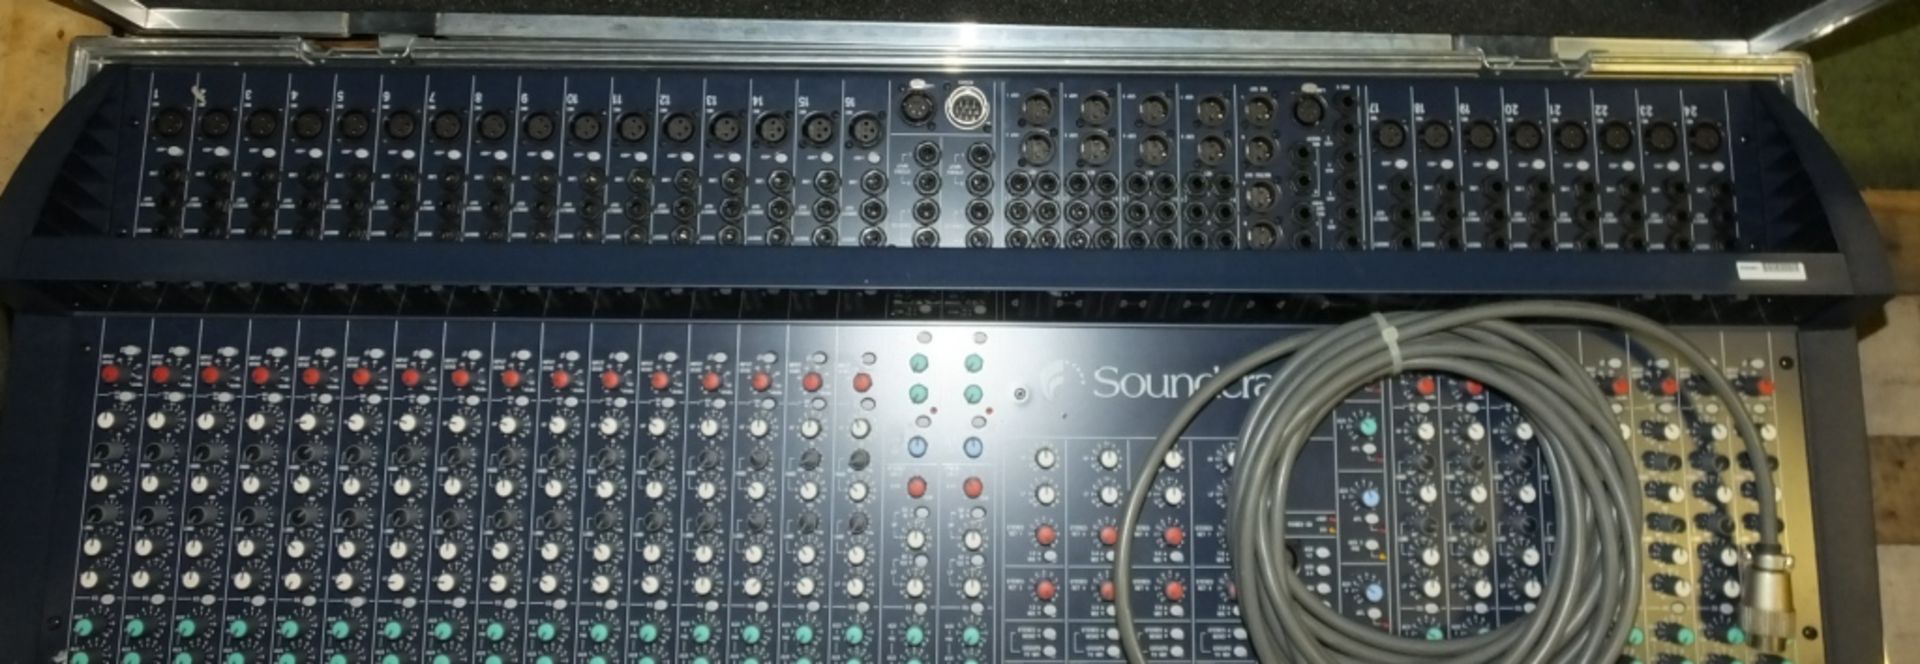 Soundcraft 8/24 Mixing Deck + Case - Image 2 of 4